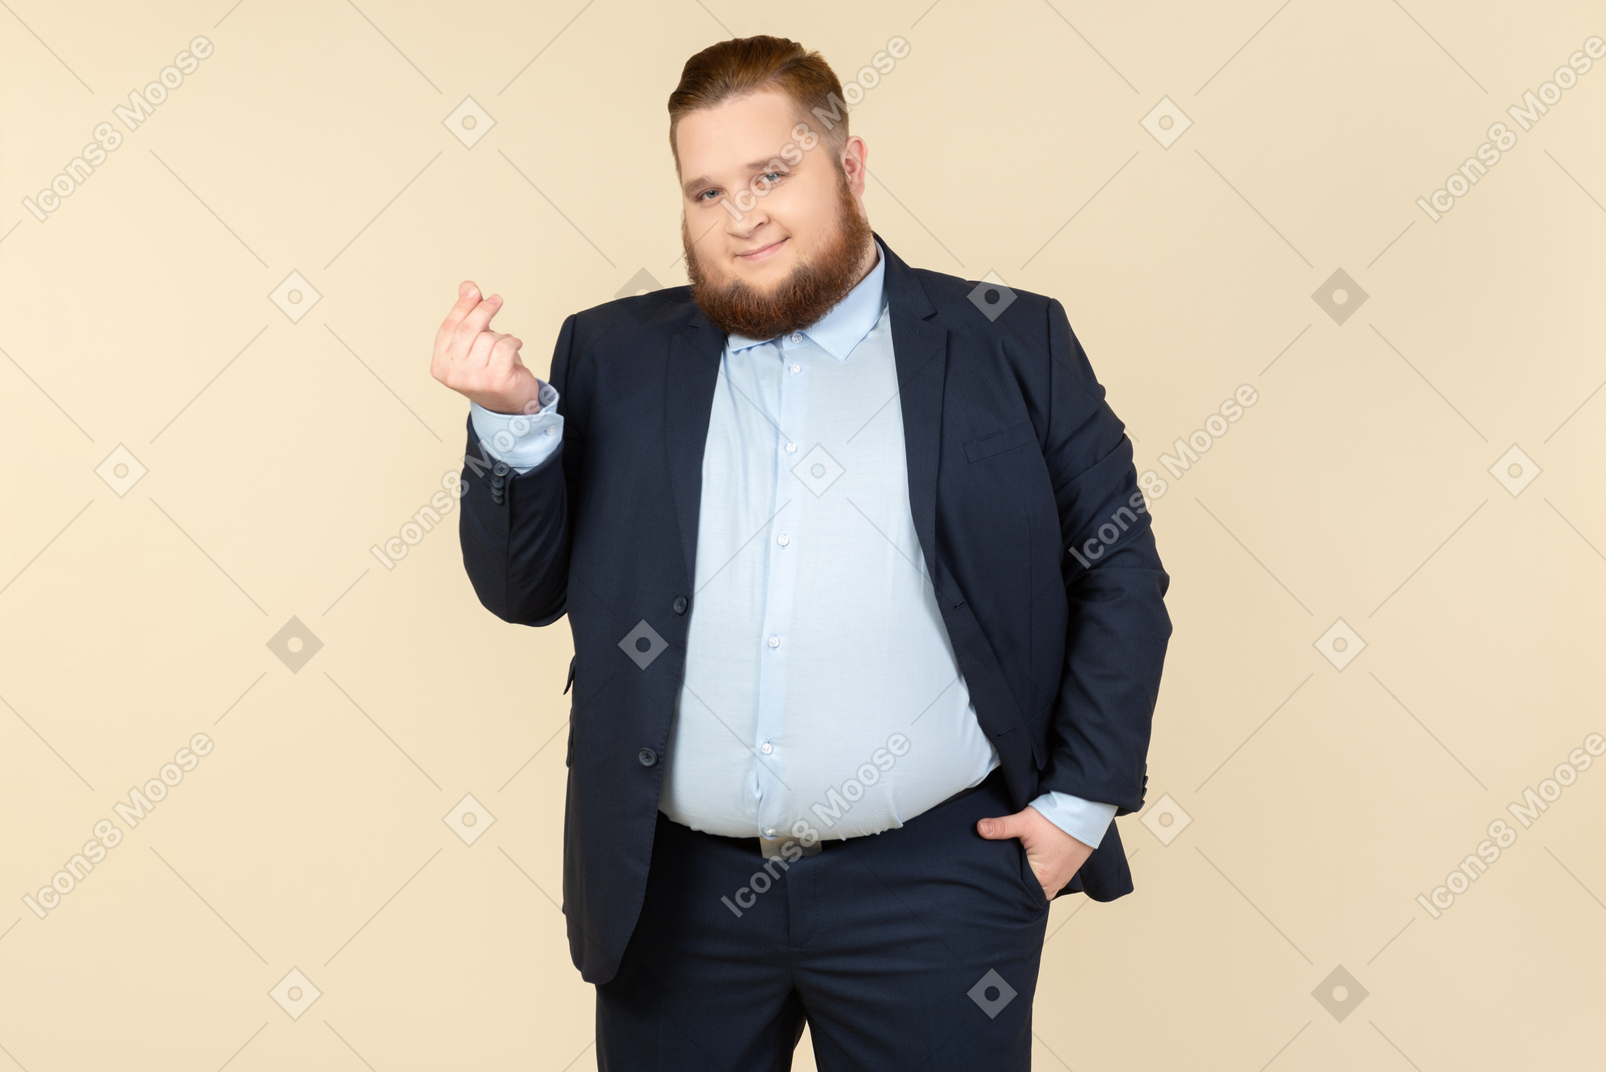 Young overweight man in suit showing money gesture